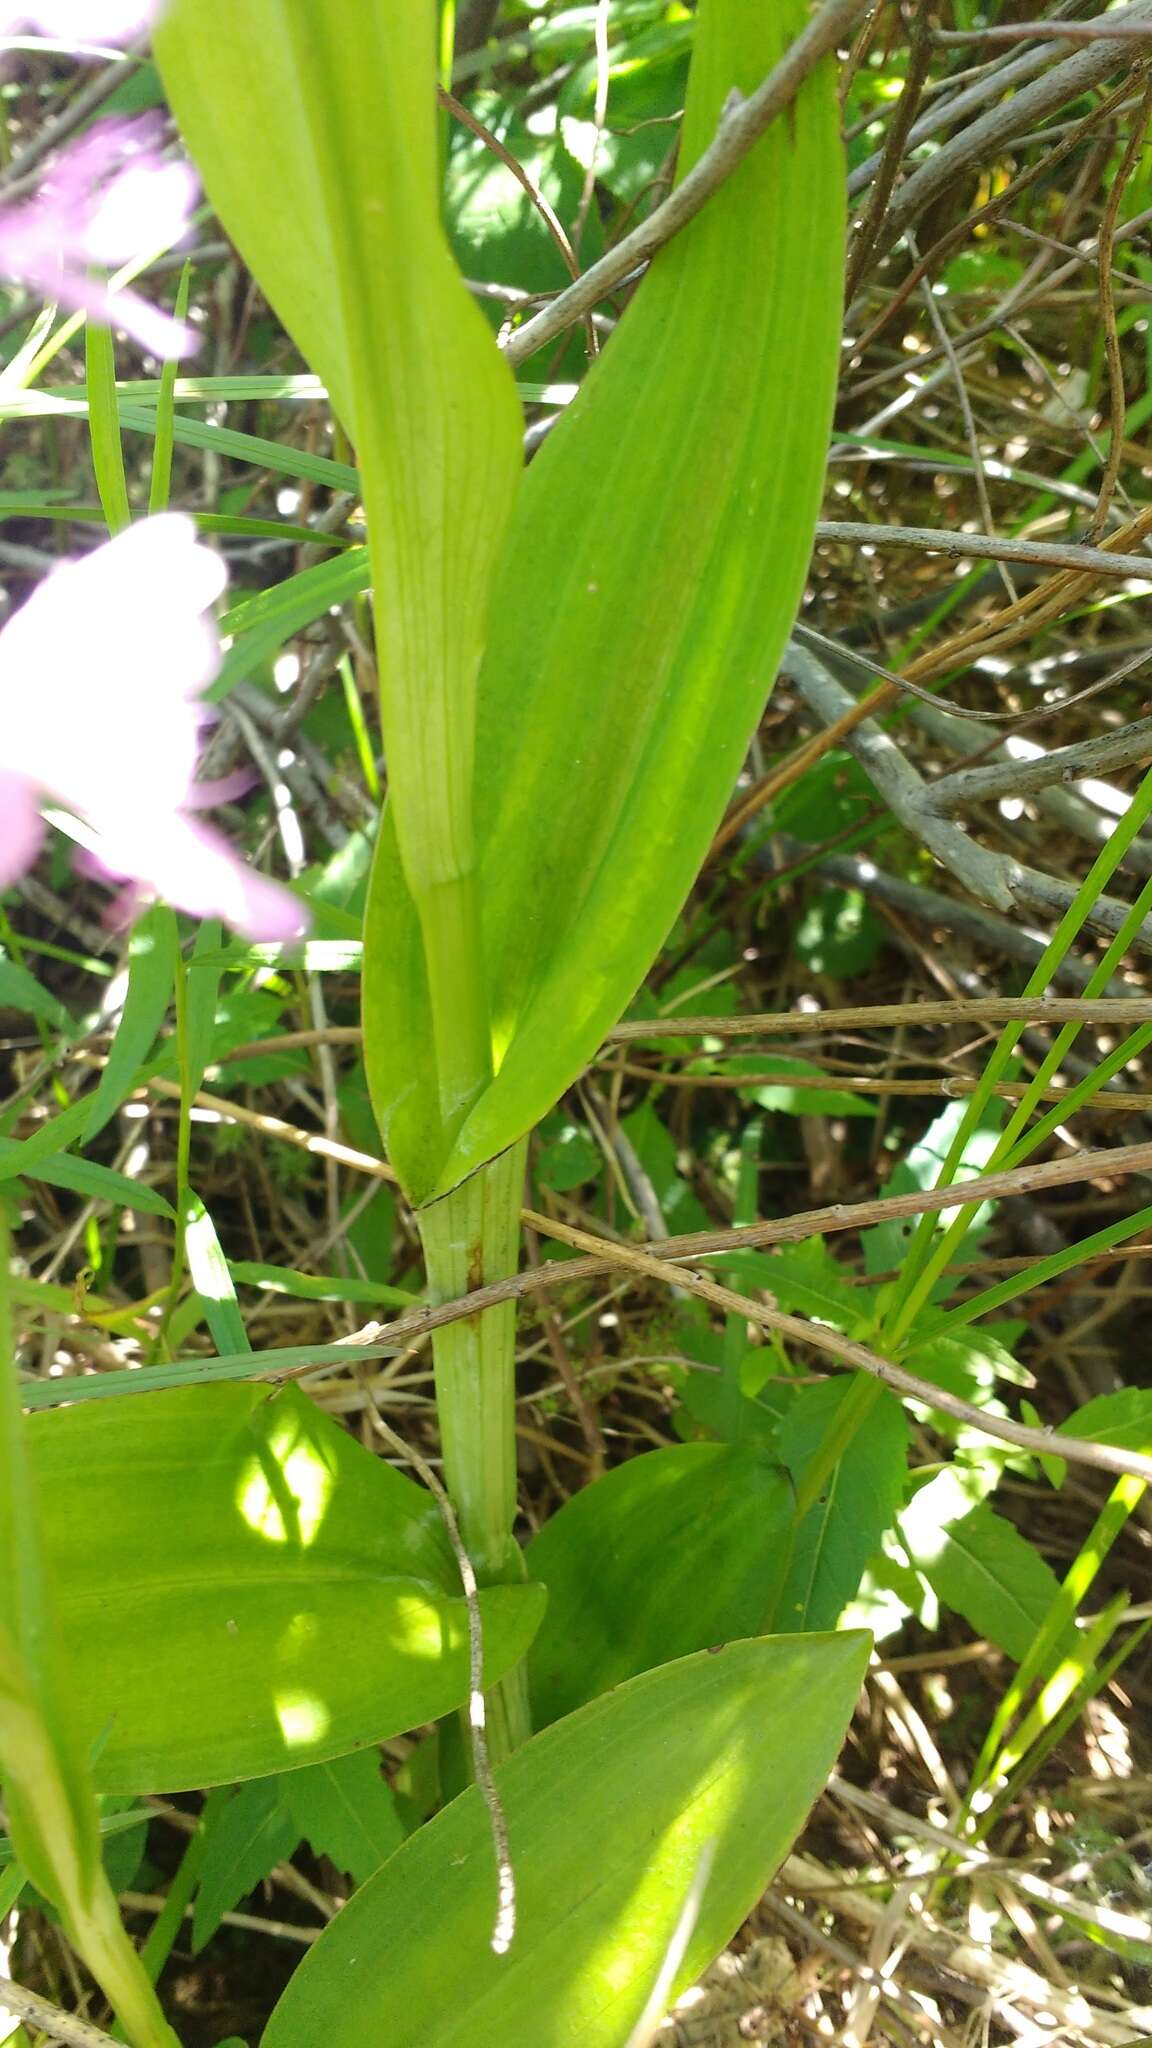 Image of Greater purple fringed orchid